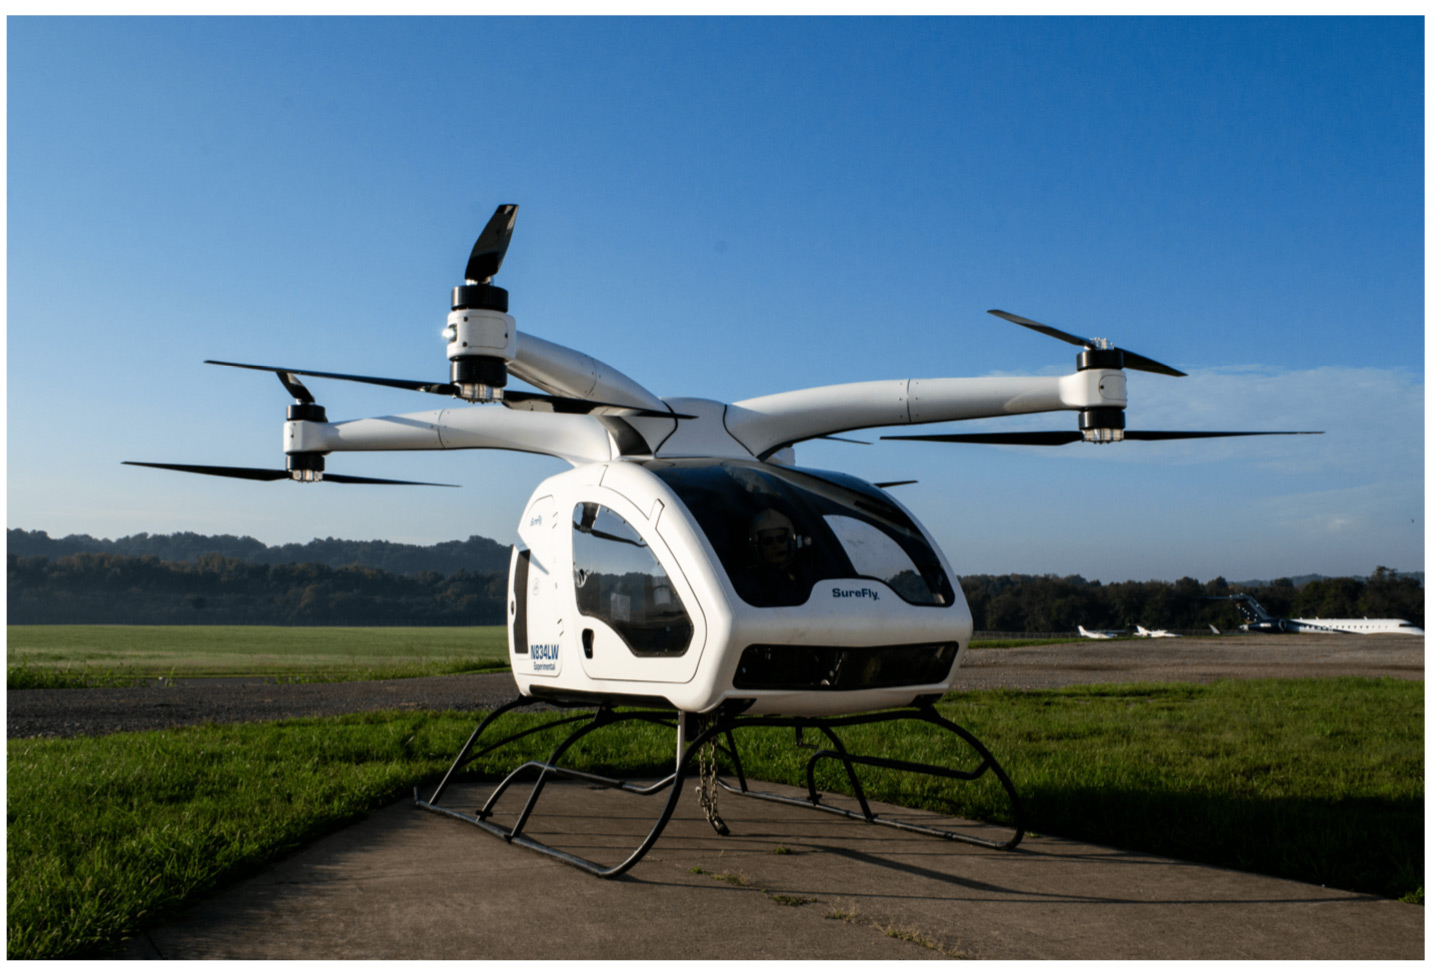 Surefly personal flying vehicle